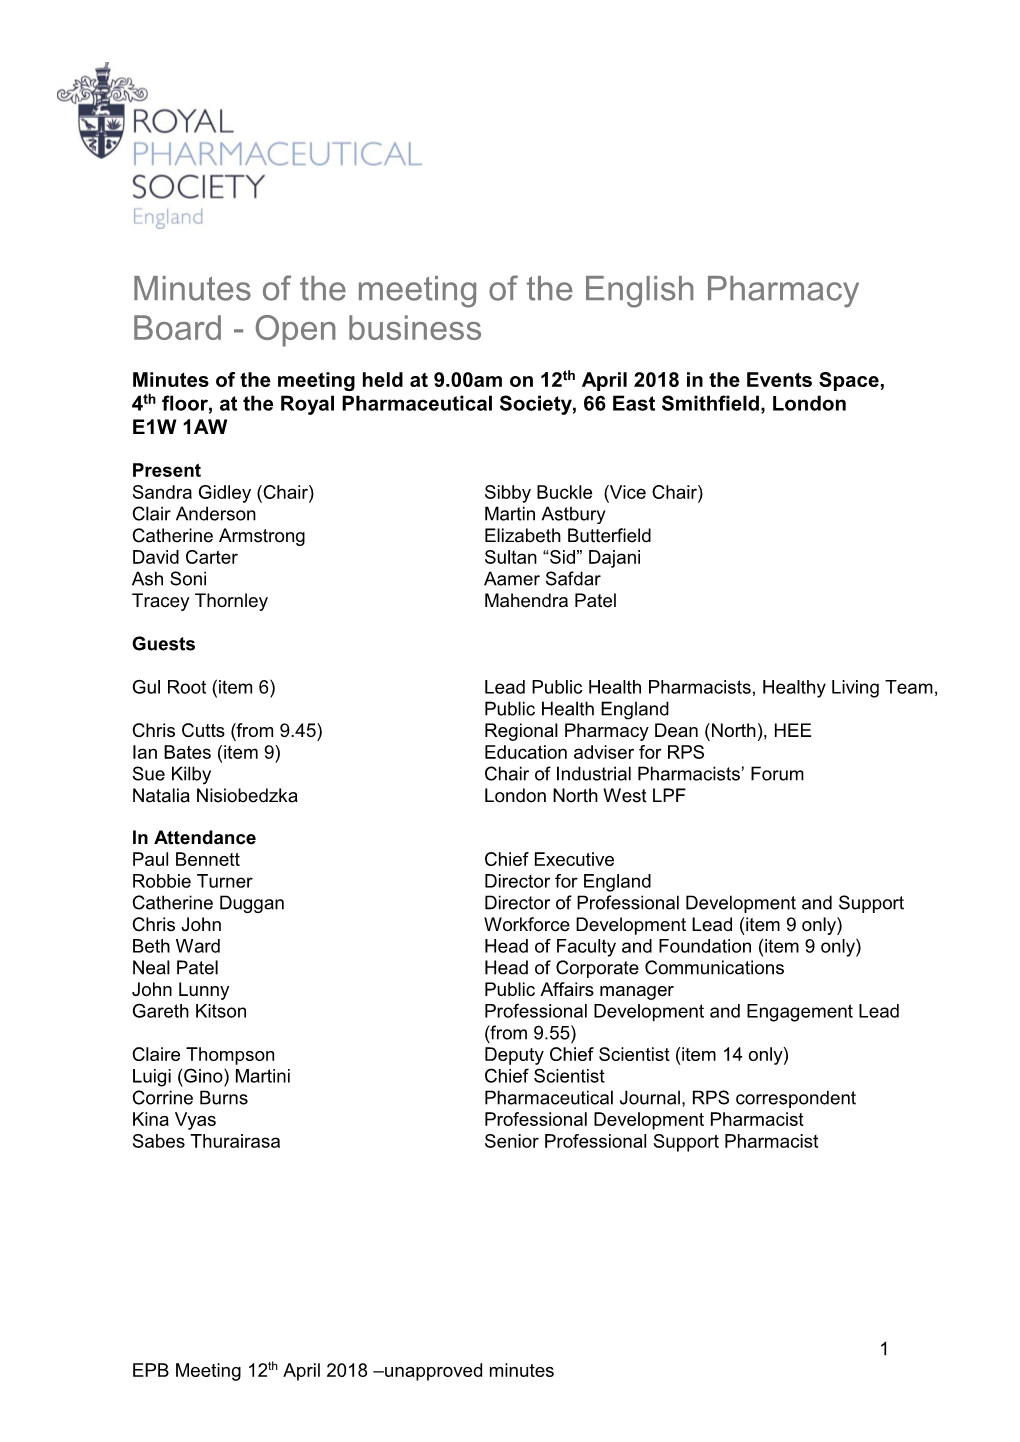 Minutes of the Meeting of the English Pharmacy Board - Open Business